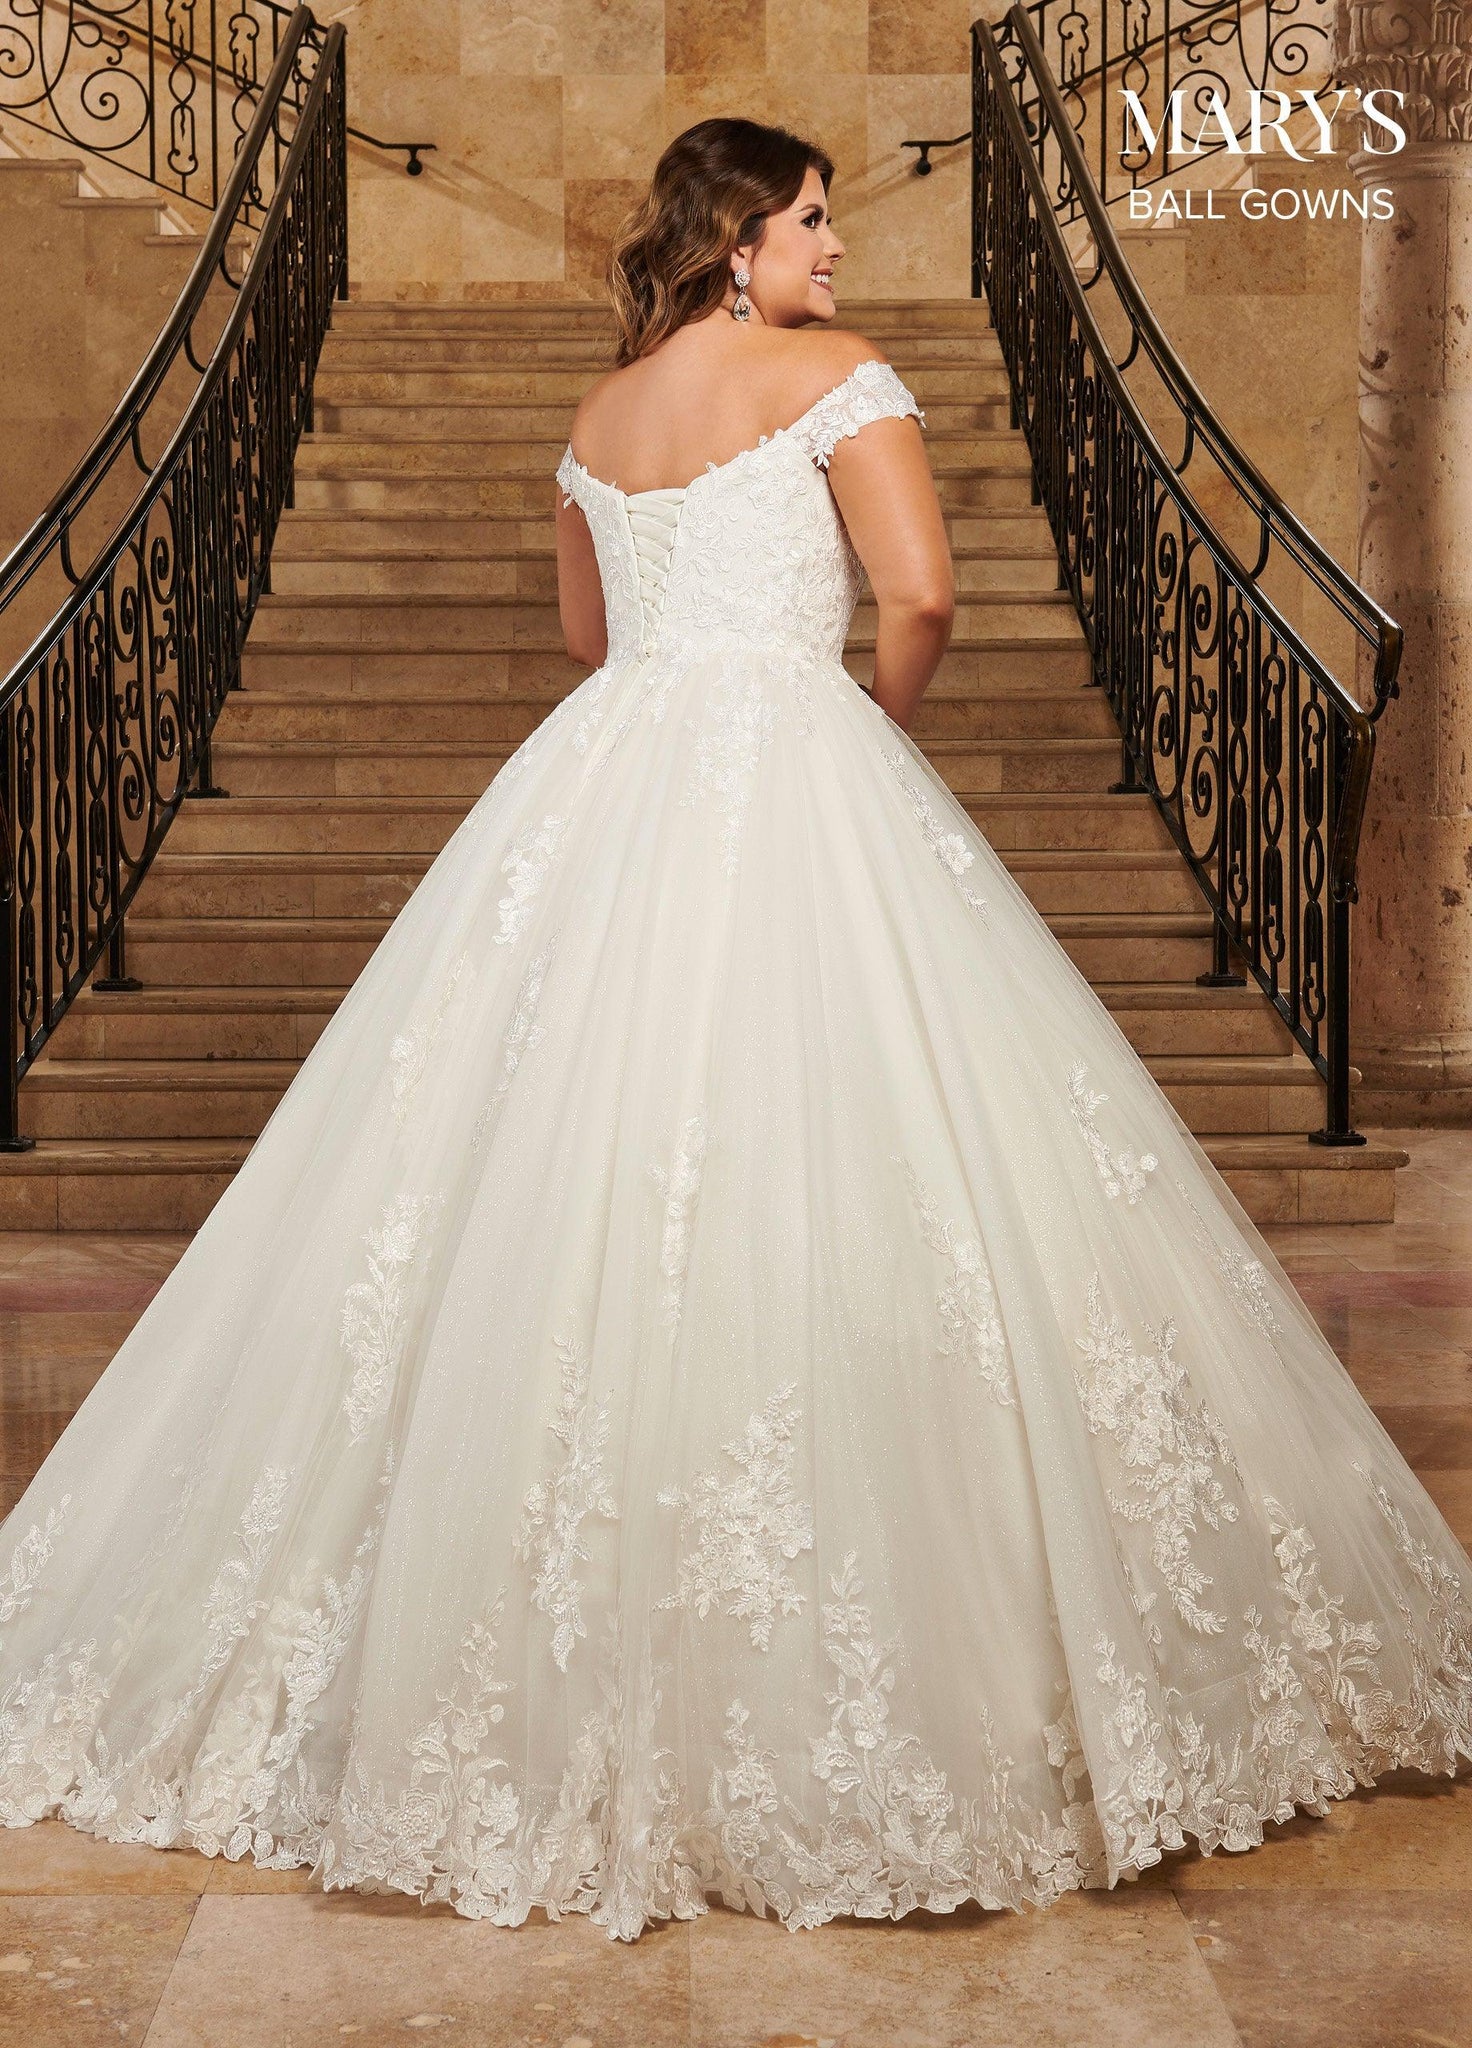 MARY'S BRIDAL - Charlotte - Adore Bridal and Occasion Wear